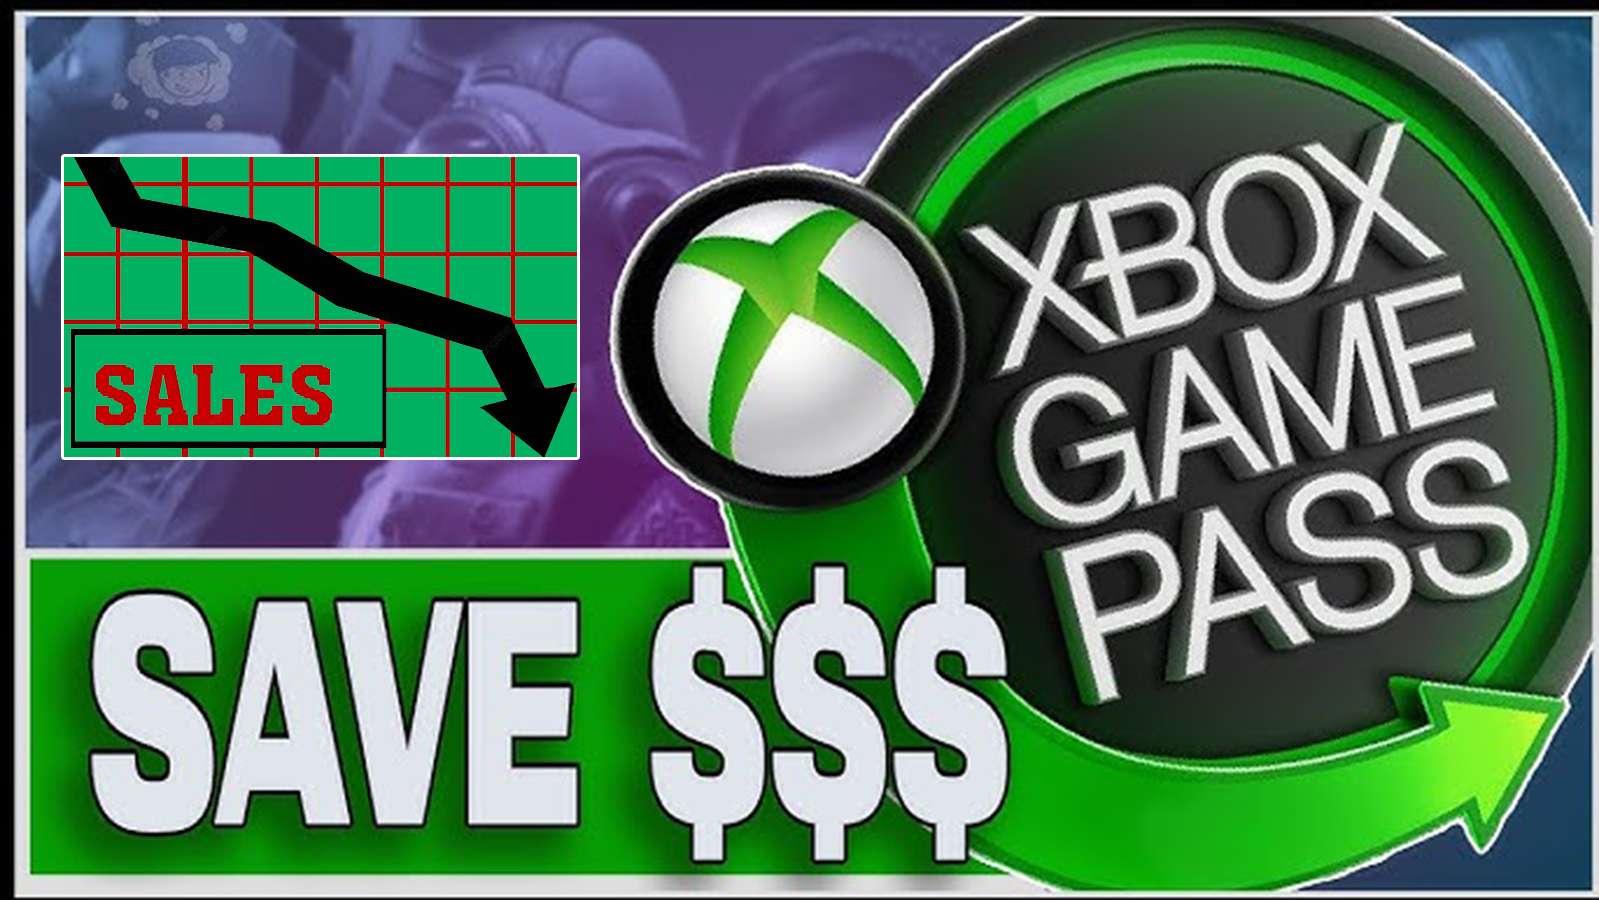 Developers Claim Game Pass Has Caused A Behavioral Shift That Has Led To Very Few Sales On Xbox